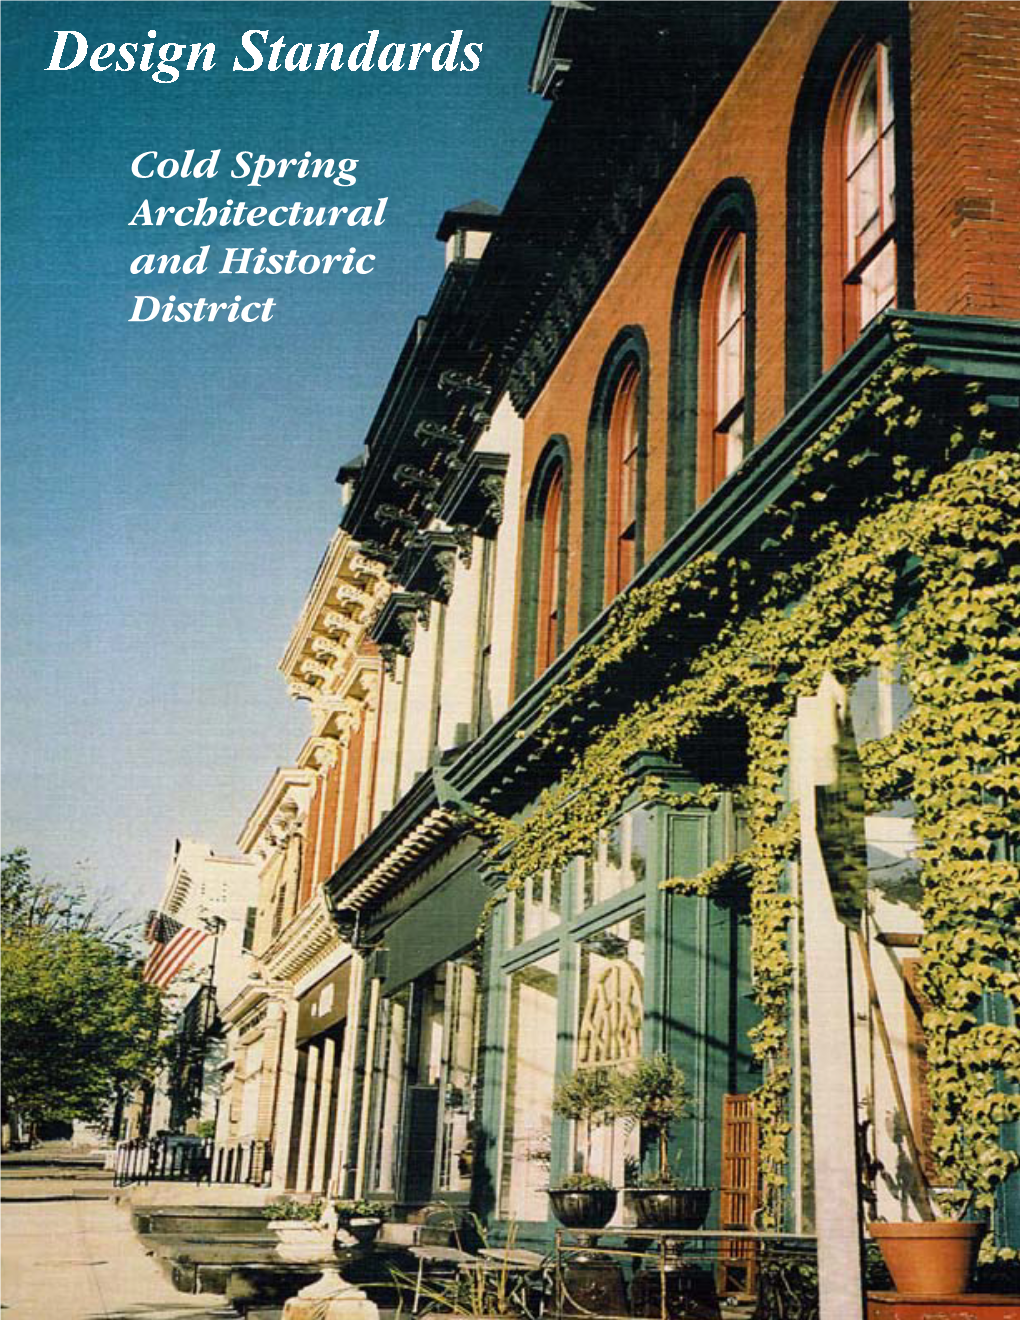 Cold Spring Architectural and Historic District Design Standards